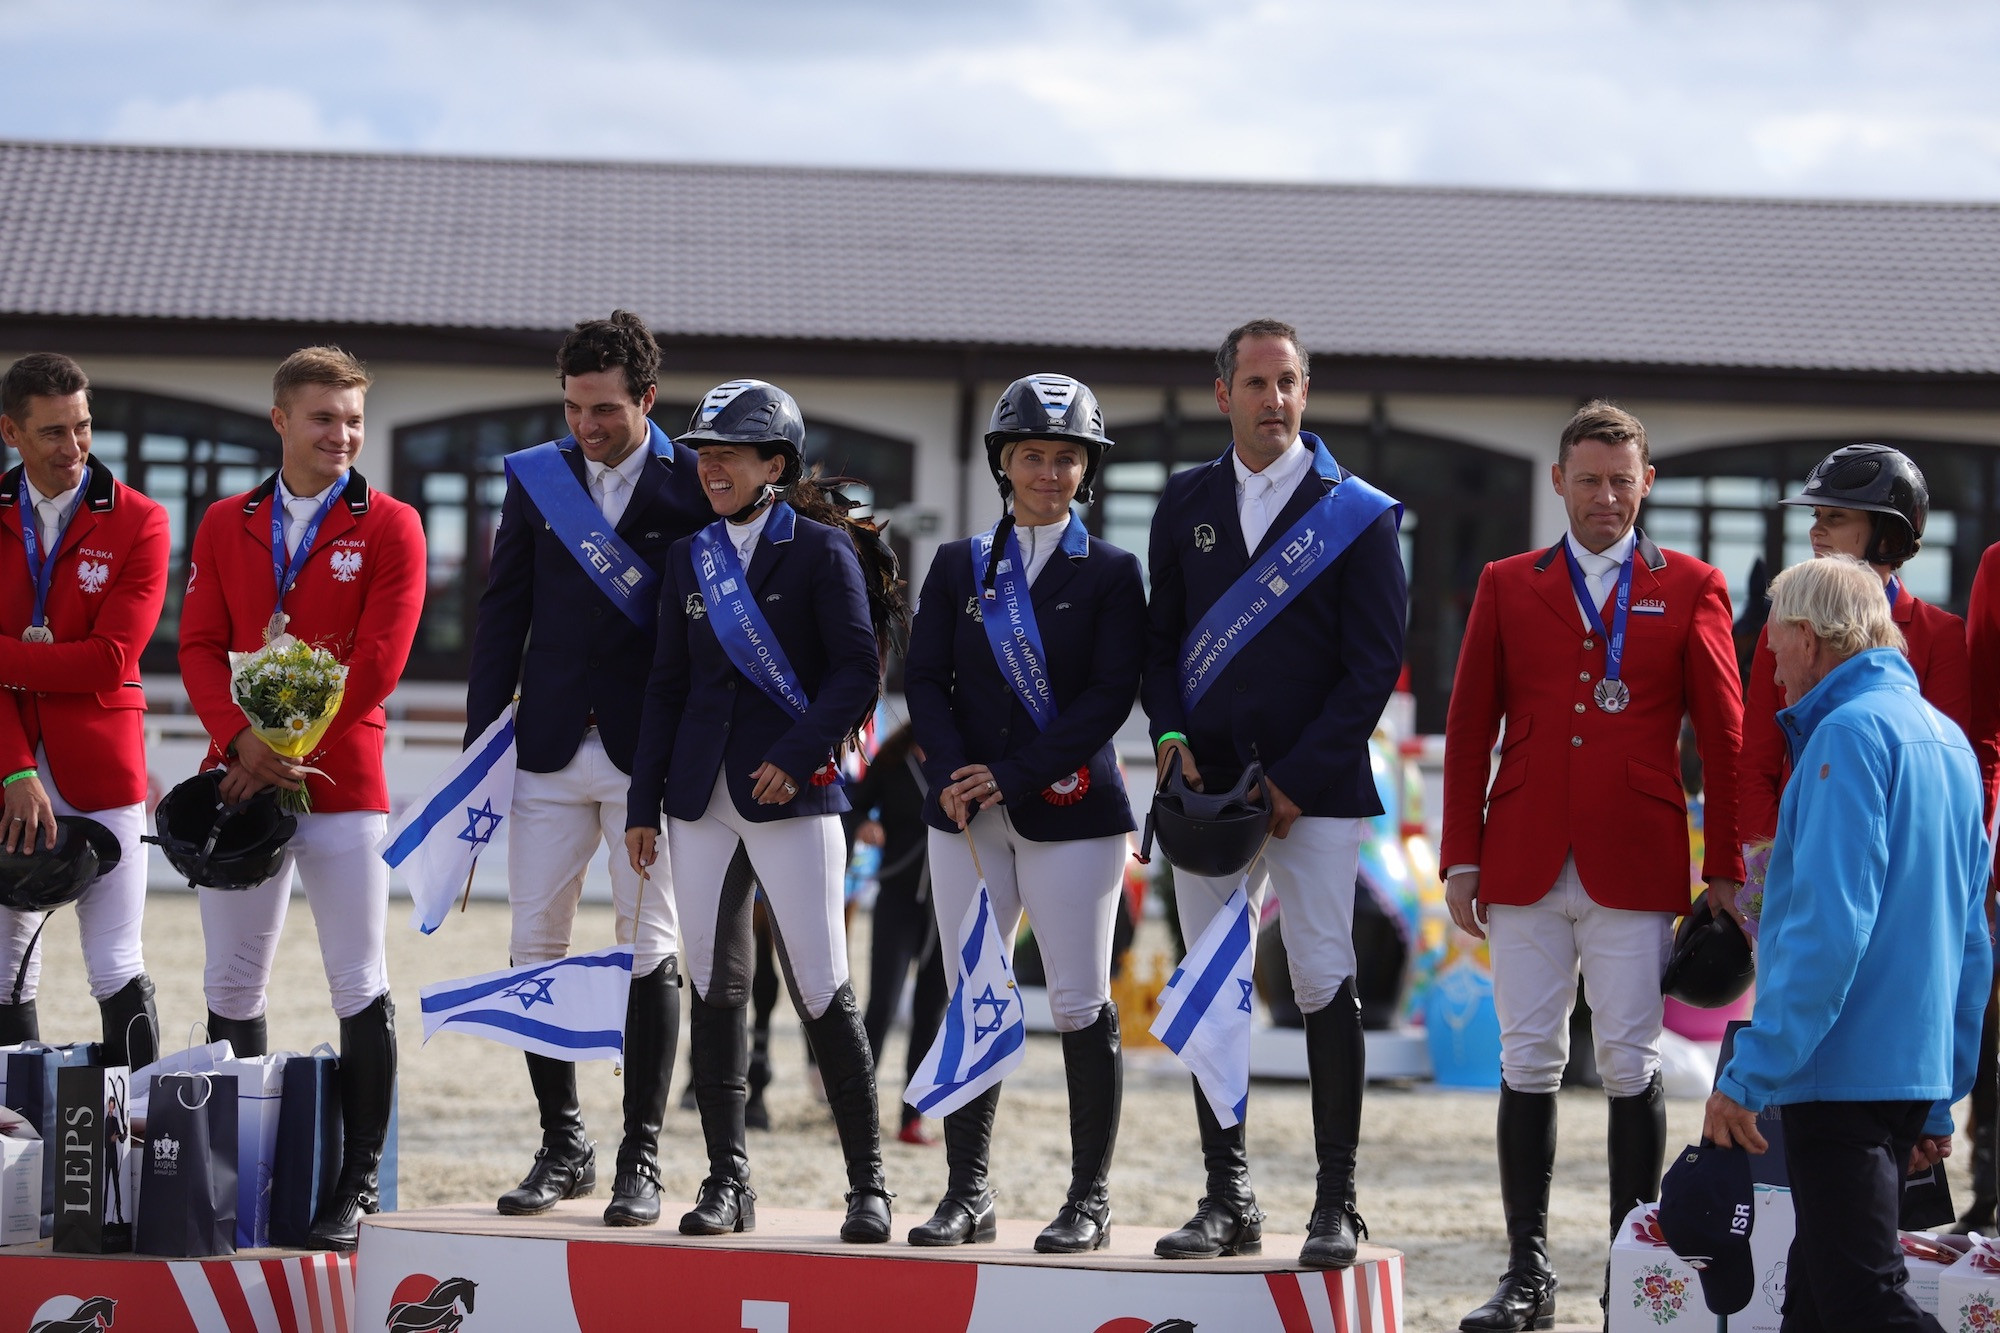 Israel earn historic Olympic berth at Tokyo 2020 with qualifying victory in Moscow